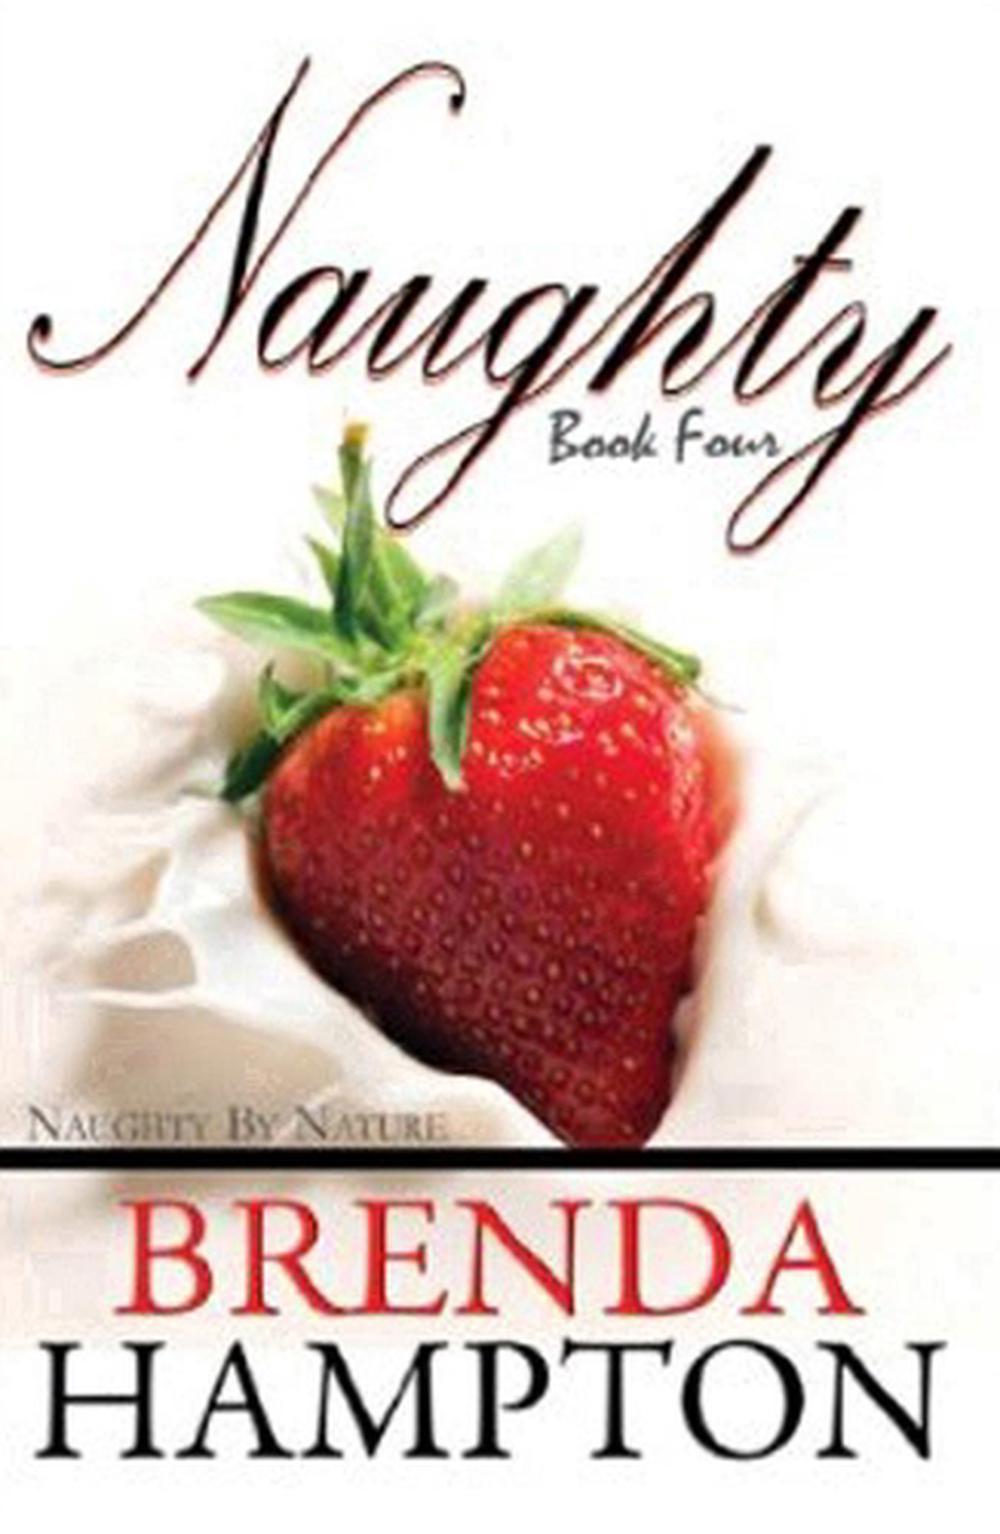 77 Top Best Writers Author Brenda Hampton Books from Famous authors